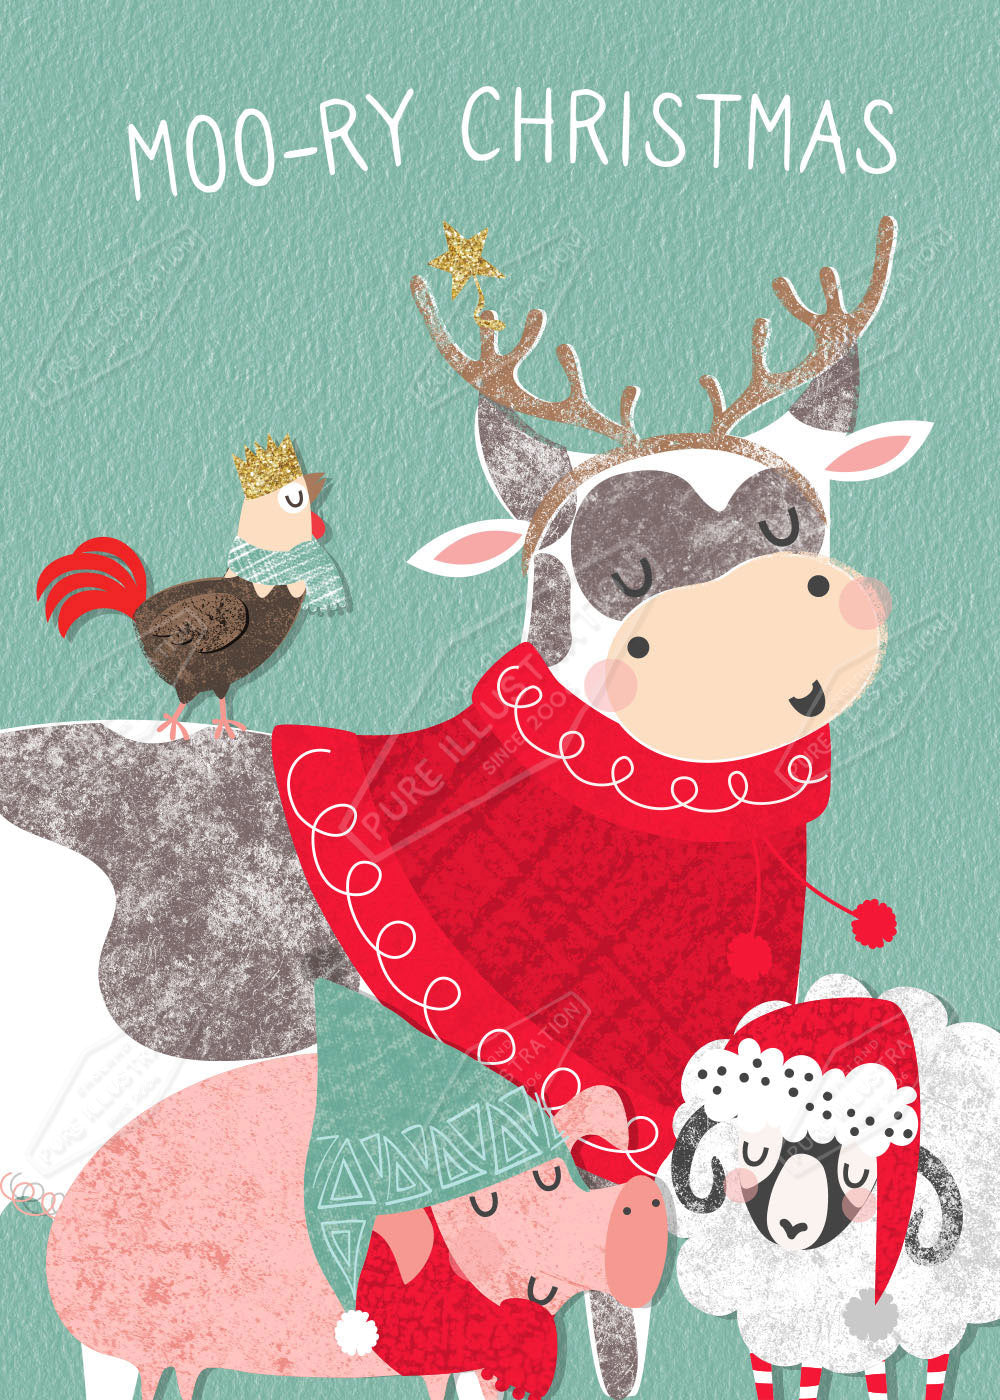 Christmas Farm Yard Characters Design by Gill Eggleston for Pure Art Licensing Agency & Surface Design Studio